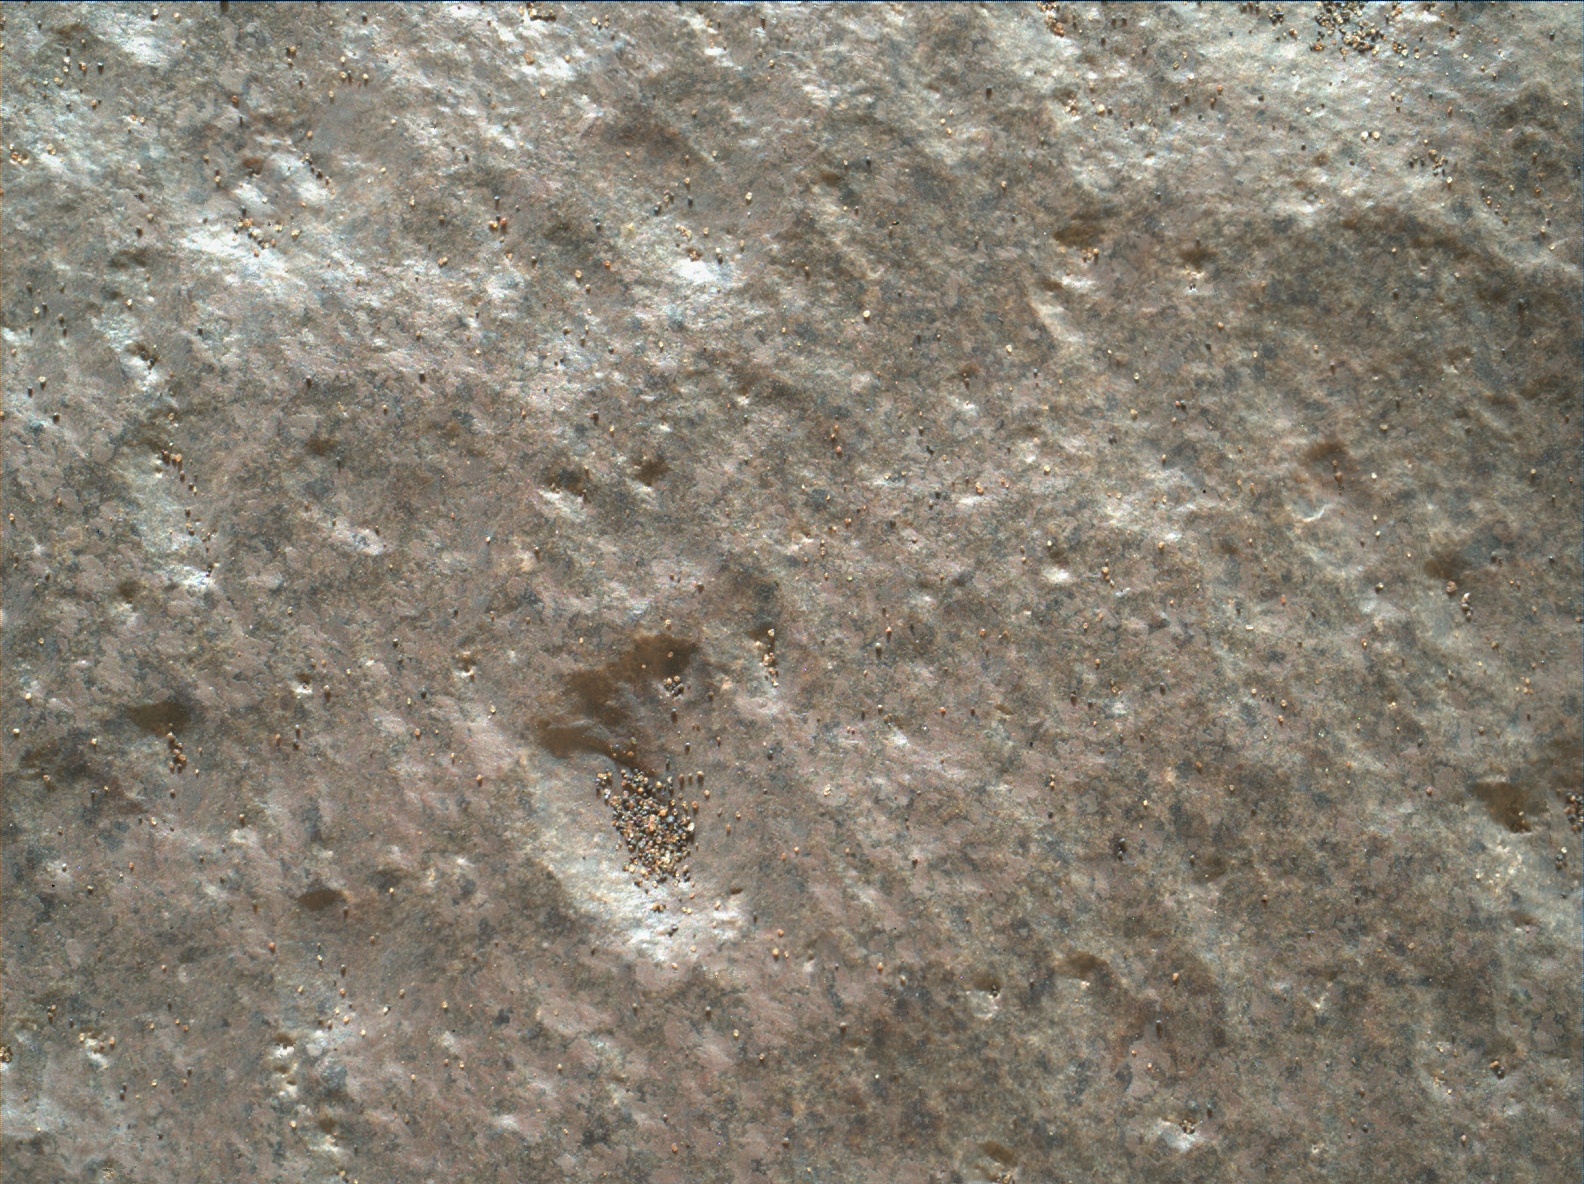 Nasa's Mars rover Curiosity acquired this image using its Mars Hand Lens Imager (MAHLI) on Sol 1608